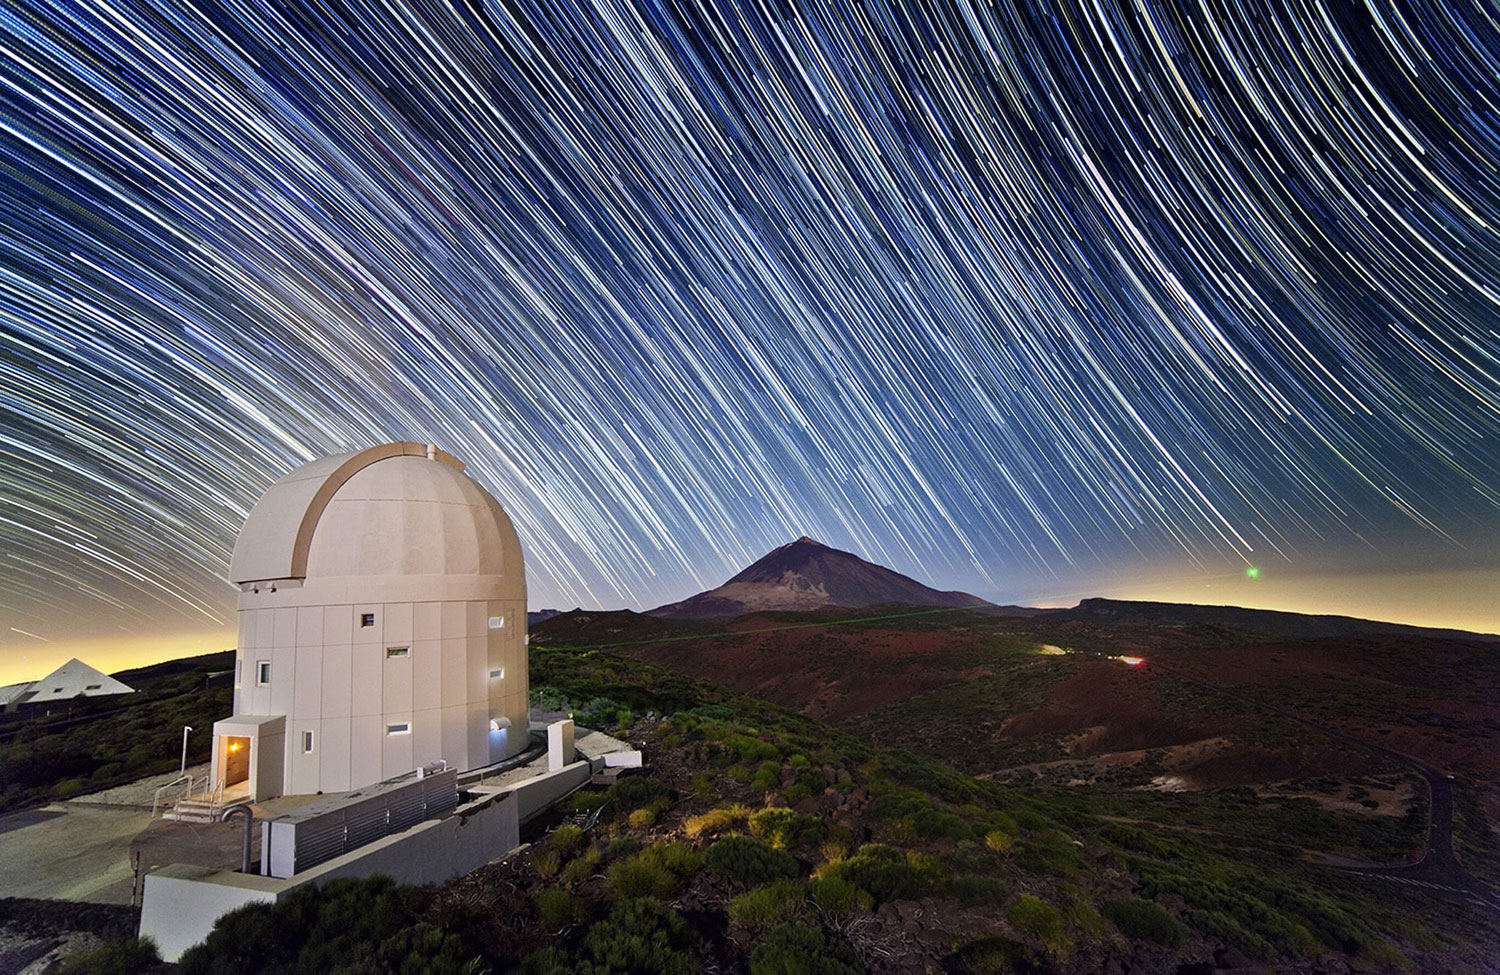 A long exposure of ESA's Optical Ground Station (OGS) housing the Lunar Lasercom Optical Ground System (LLOGS) at the La Teide Observatory on Tenerife, Canary Islands, Spain, released on April 27, 2014.